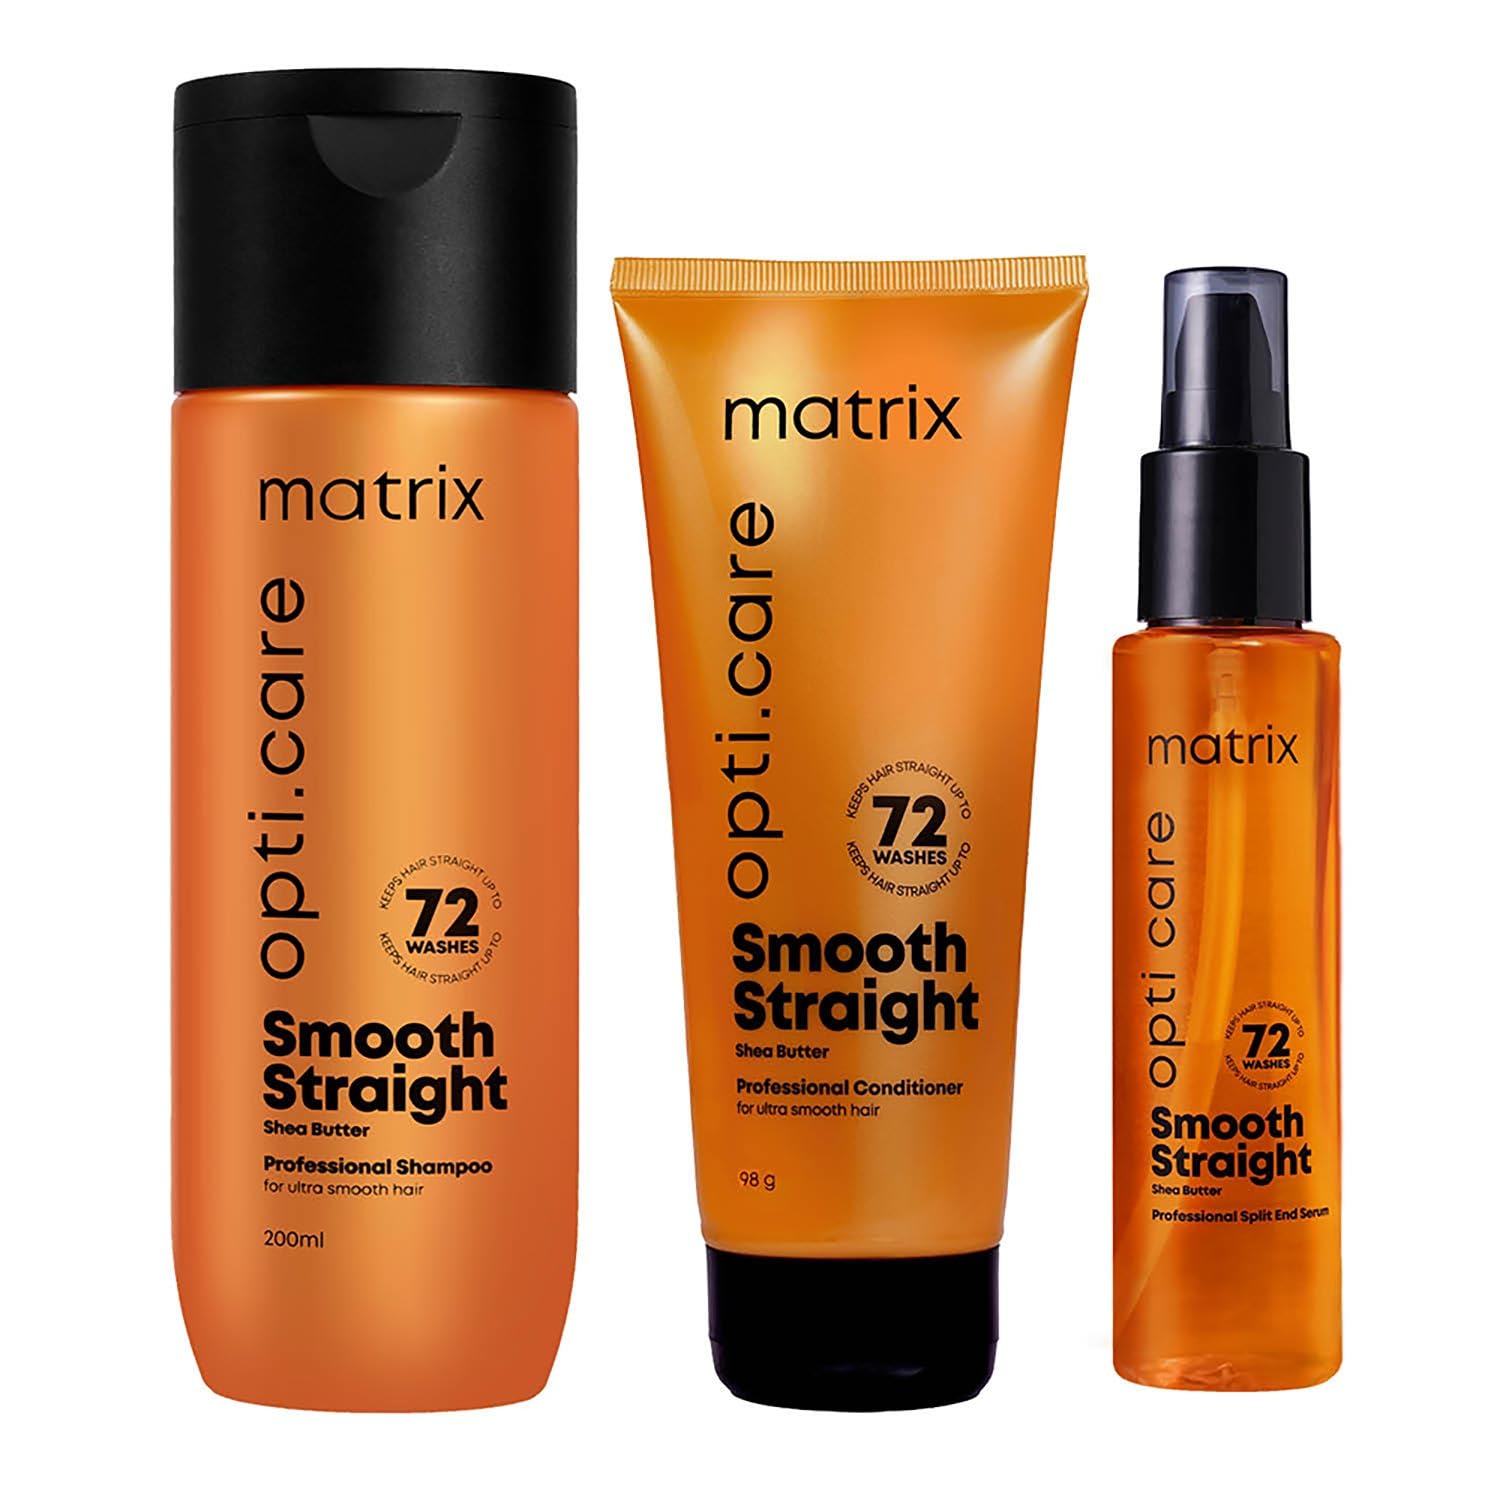 Matrix Opti.Care Professional Shampoo + Conditioner + Serum Combo for Smooth & Straight Hair with Shea Butter | No Added Parabens (200 ml + 98 g + 100 ml)